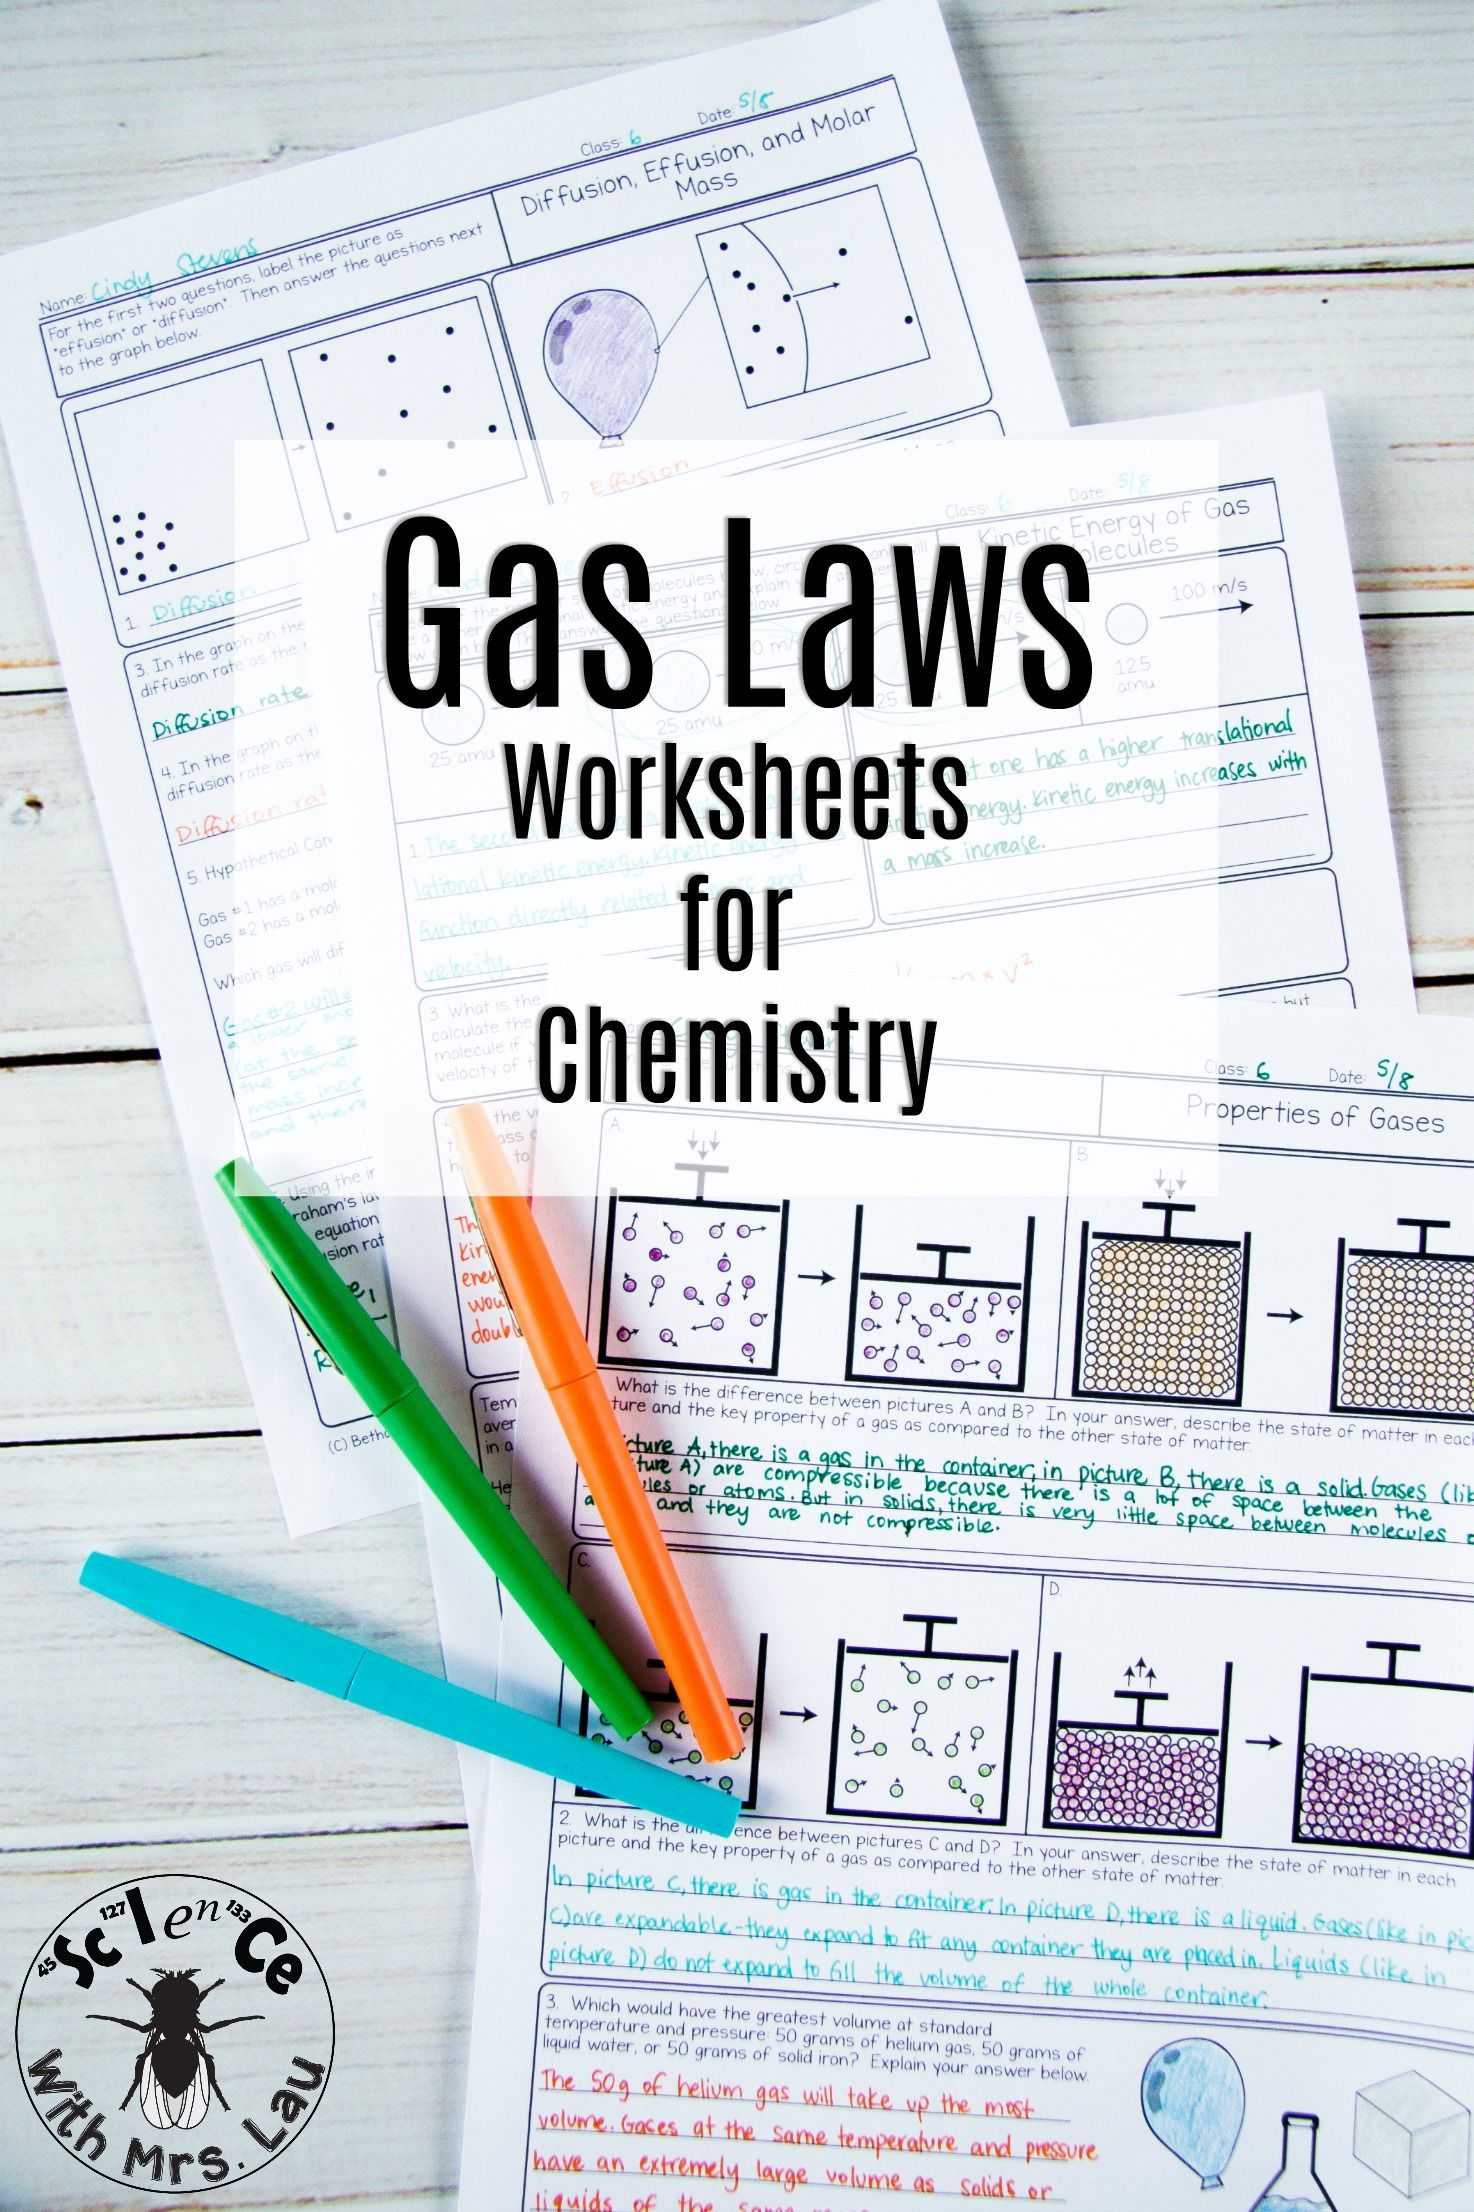 Introduction to Genetics Worksheet together with Gas Laws Chemistry Homework Pages